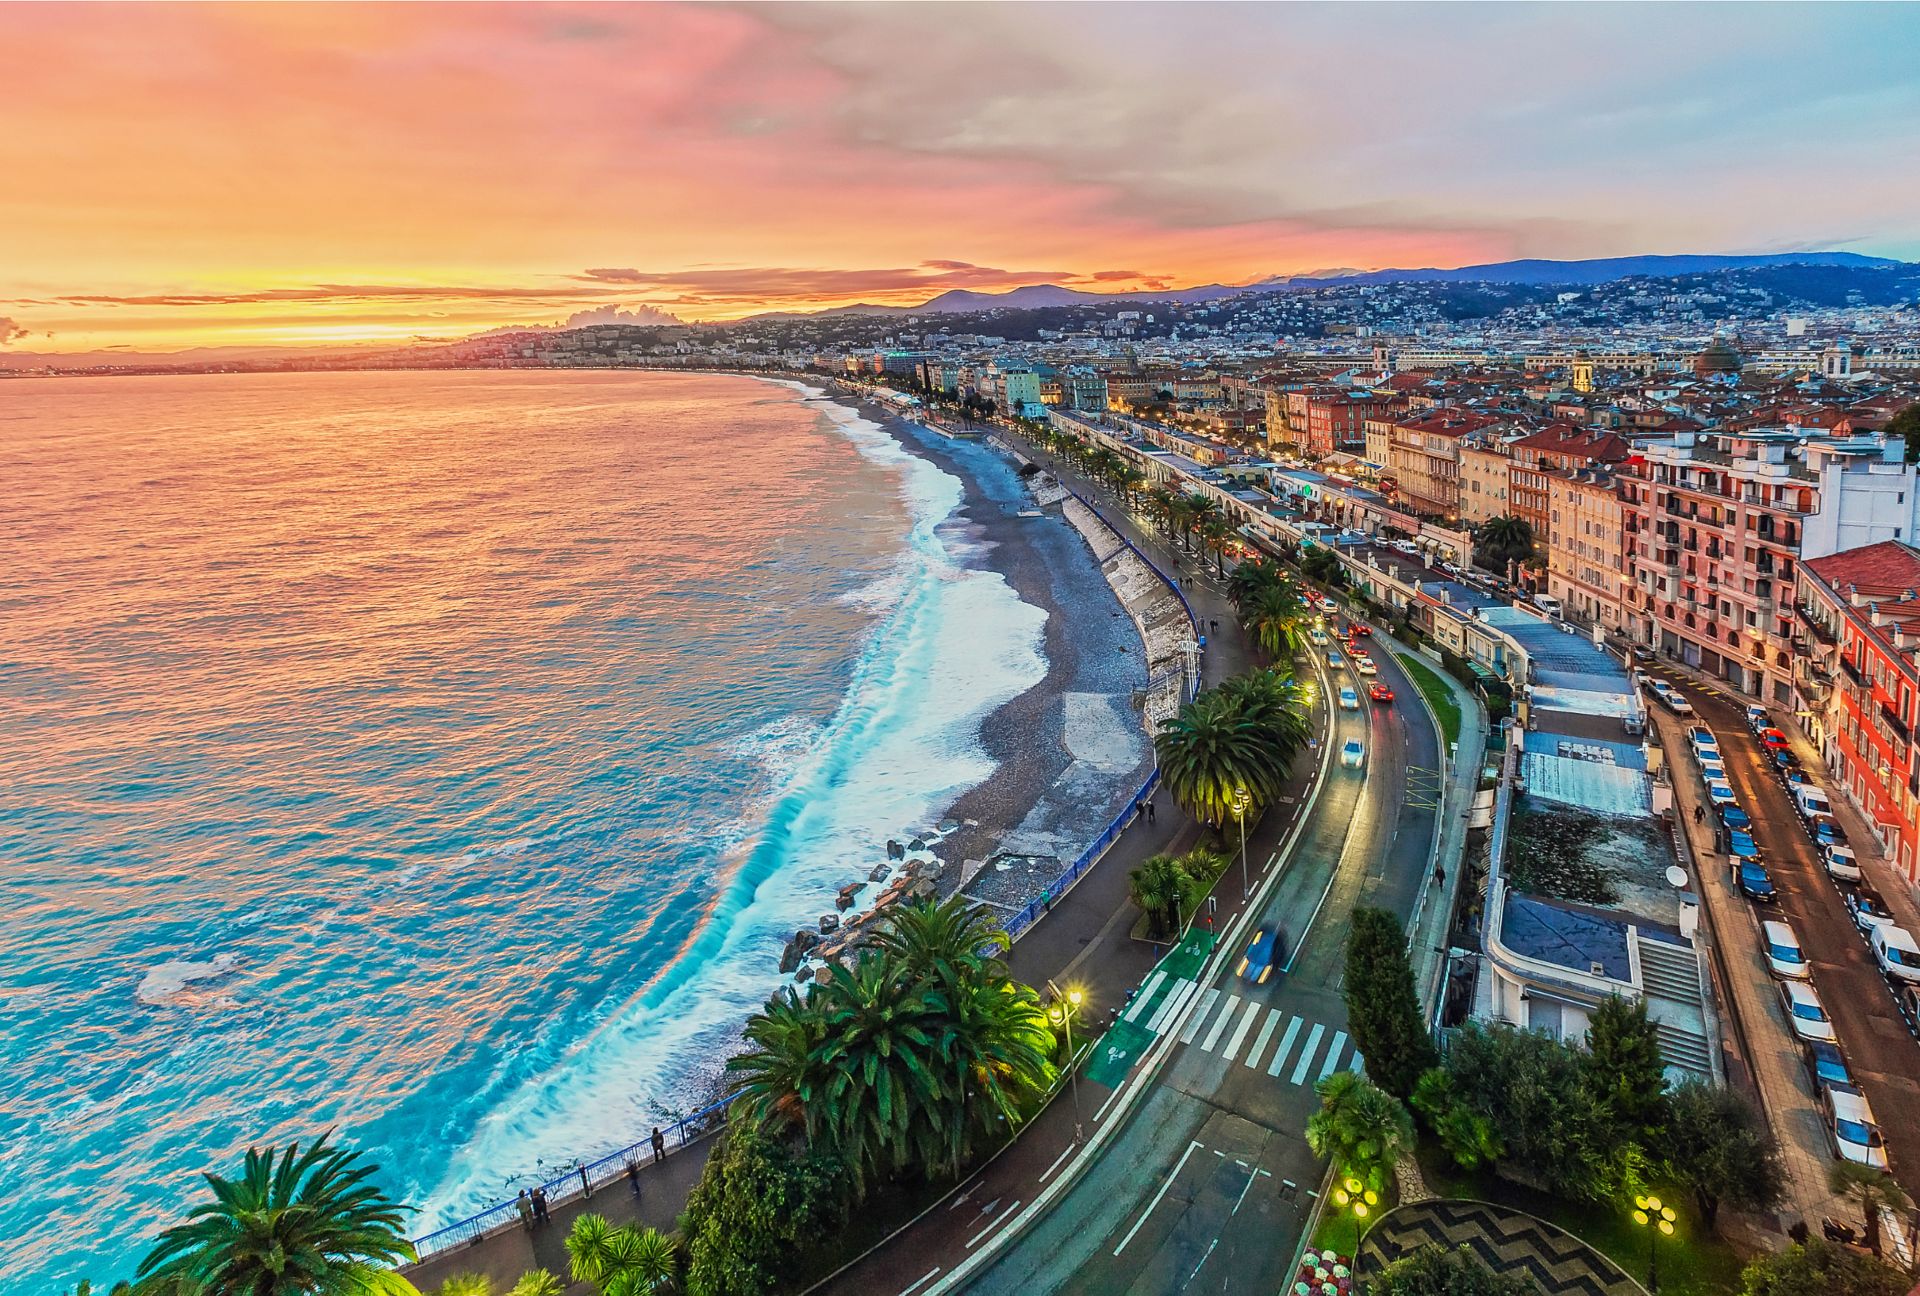 Frontal view to the Mediterranean sea, Bay of Angels, Nice, France